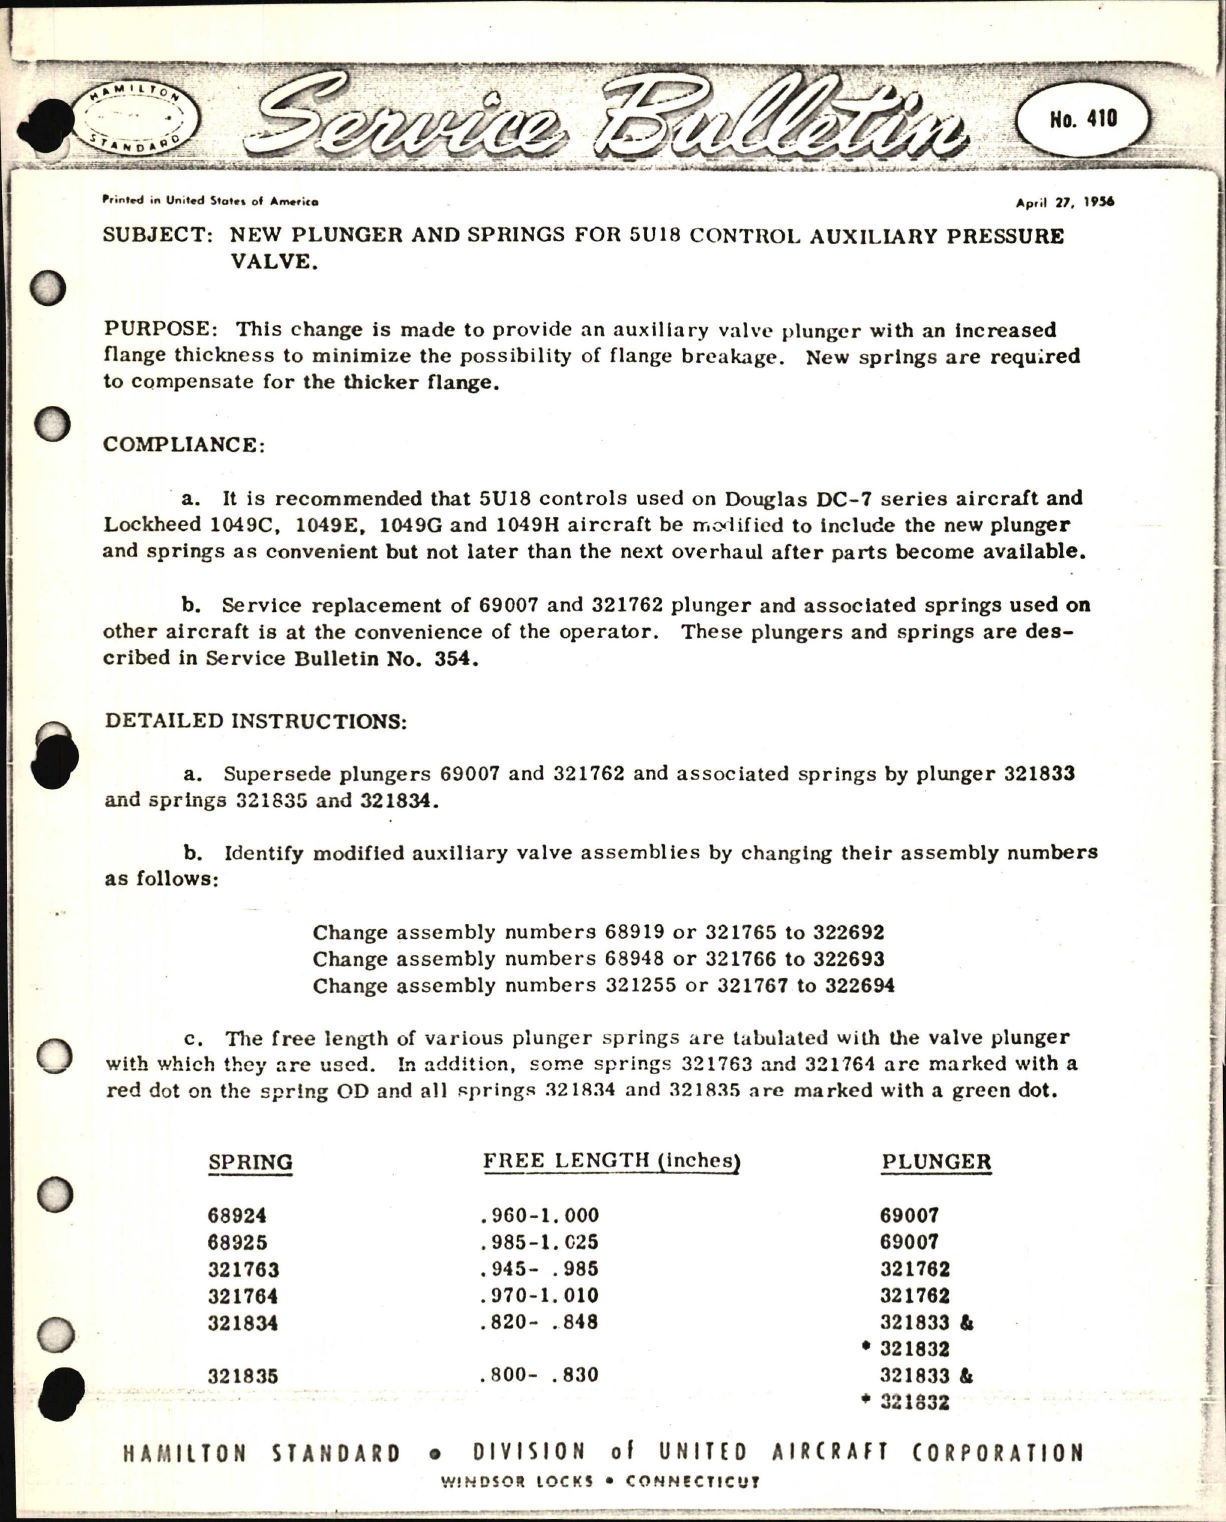 Sample page 1 from AirCorps Library document: New Plunger and Springs for 5U18 Control Auxiliary Pressure Valve